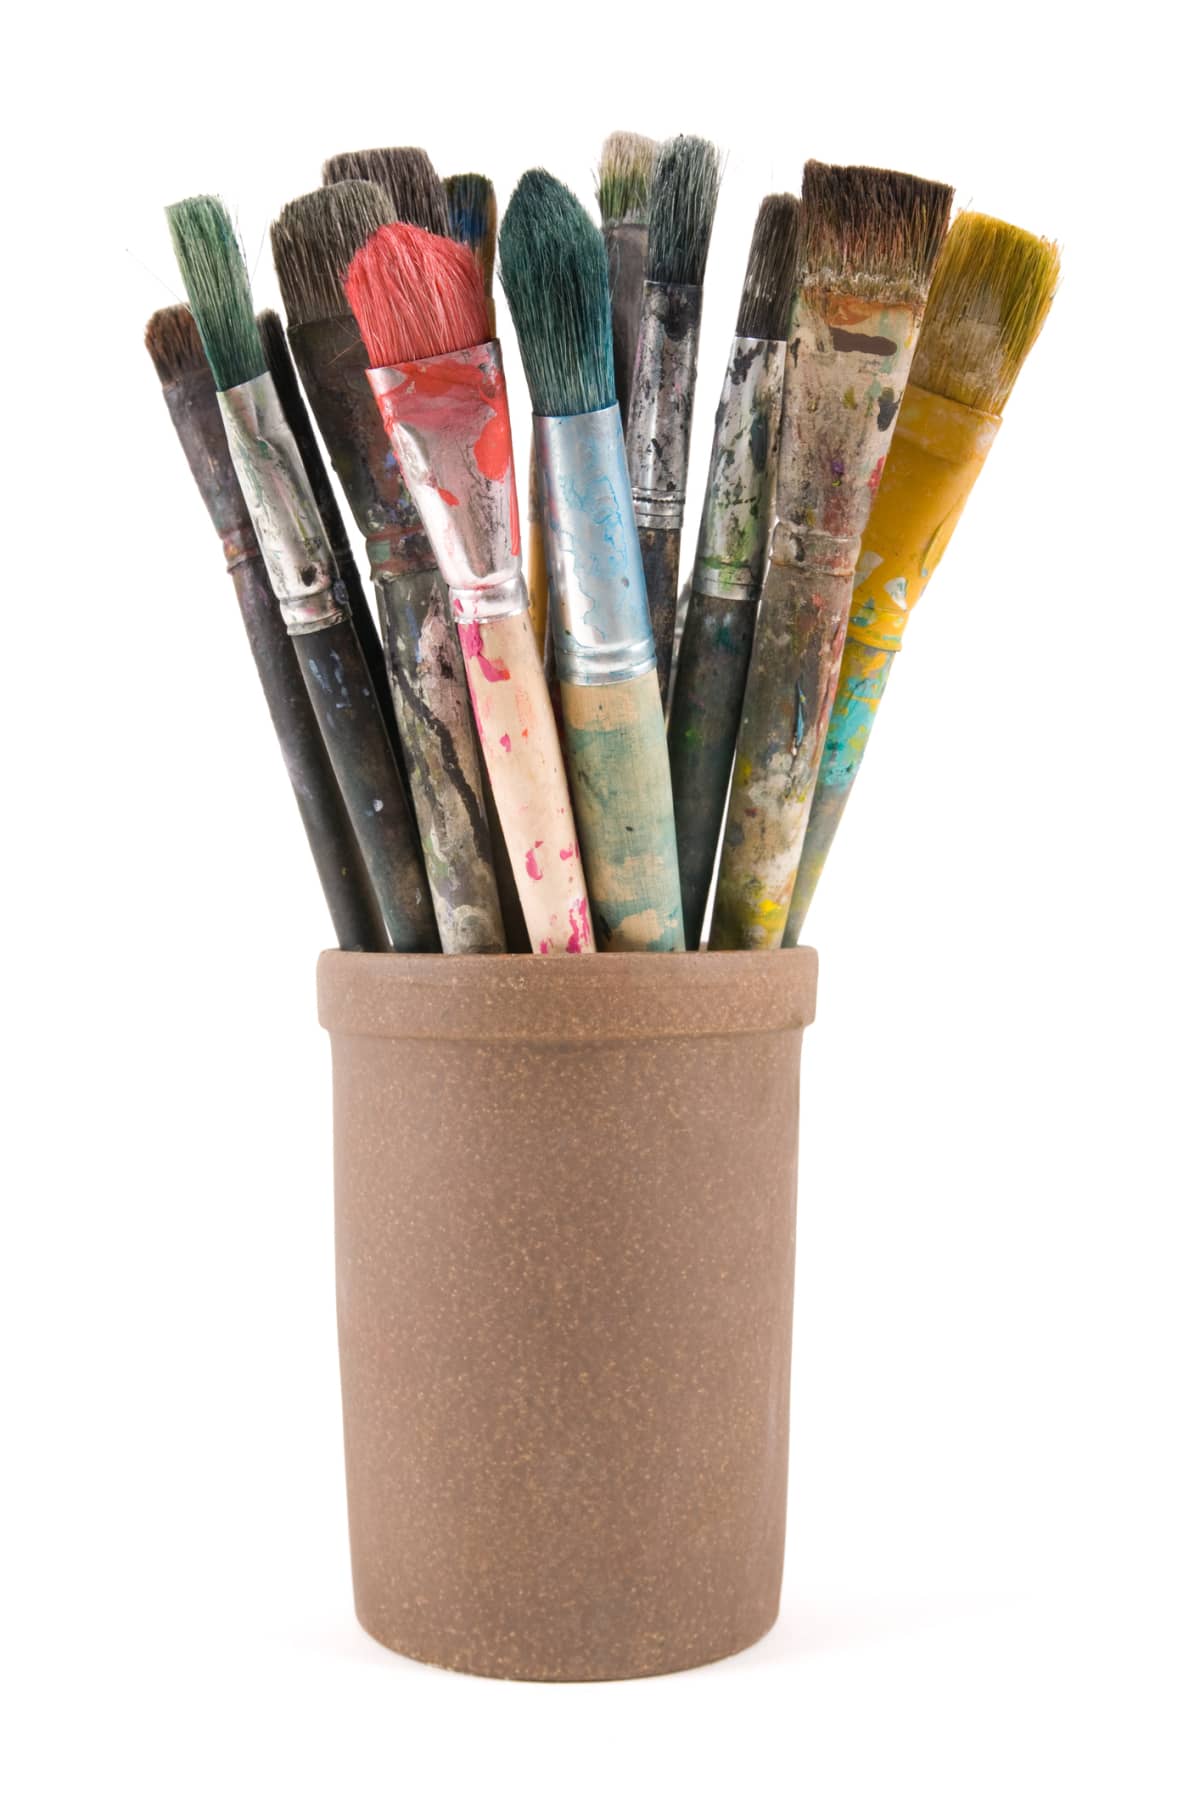 several dried paint brushes in a container